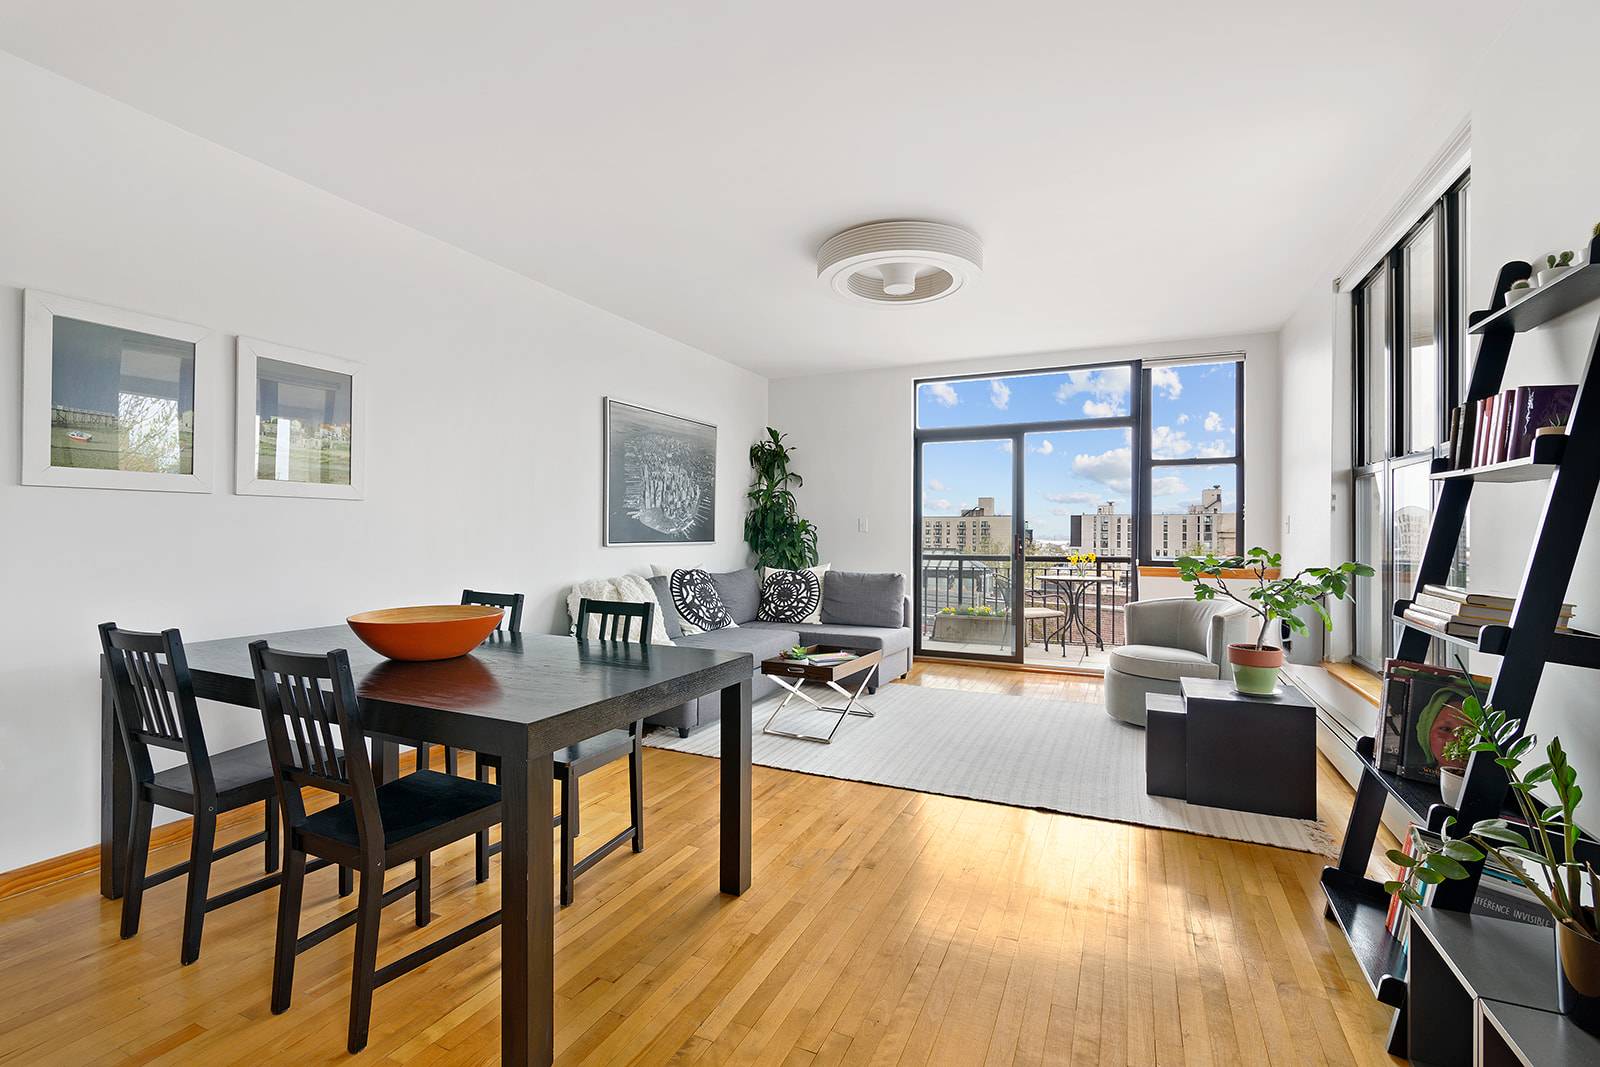 This charming, loft style two bedroom, two bath condo really does have it all warmth, spaciousness, and a sprawling private terrace with spectacular views of the city !